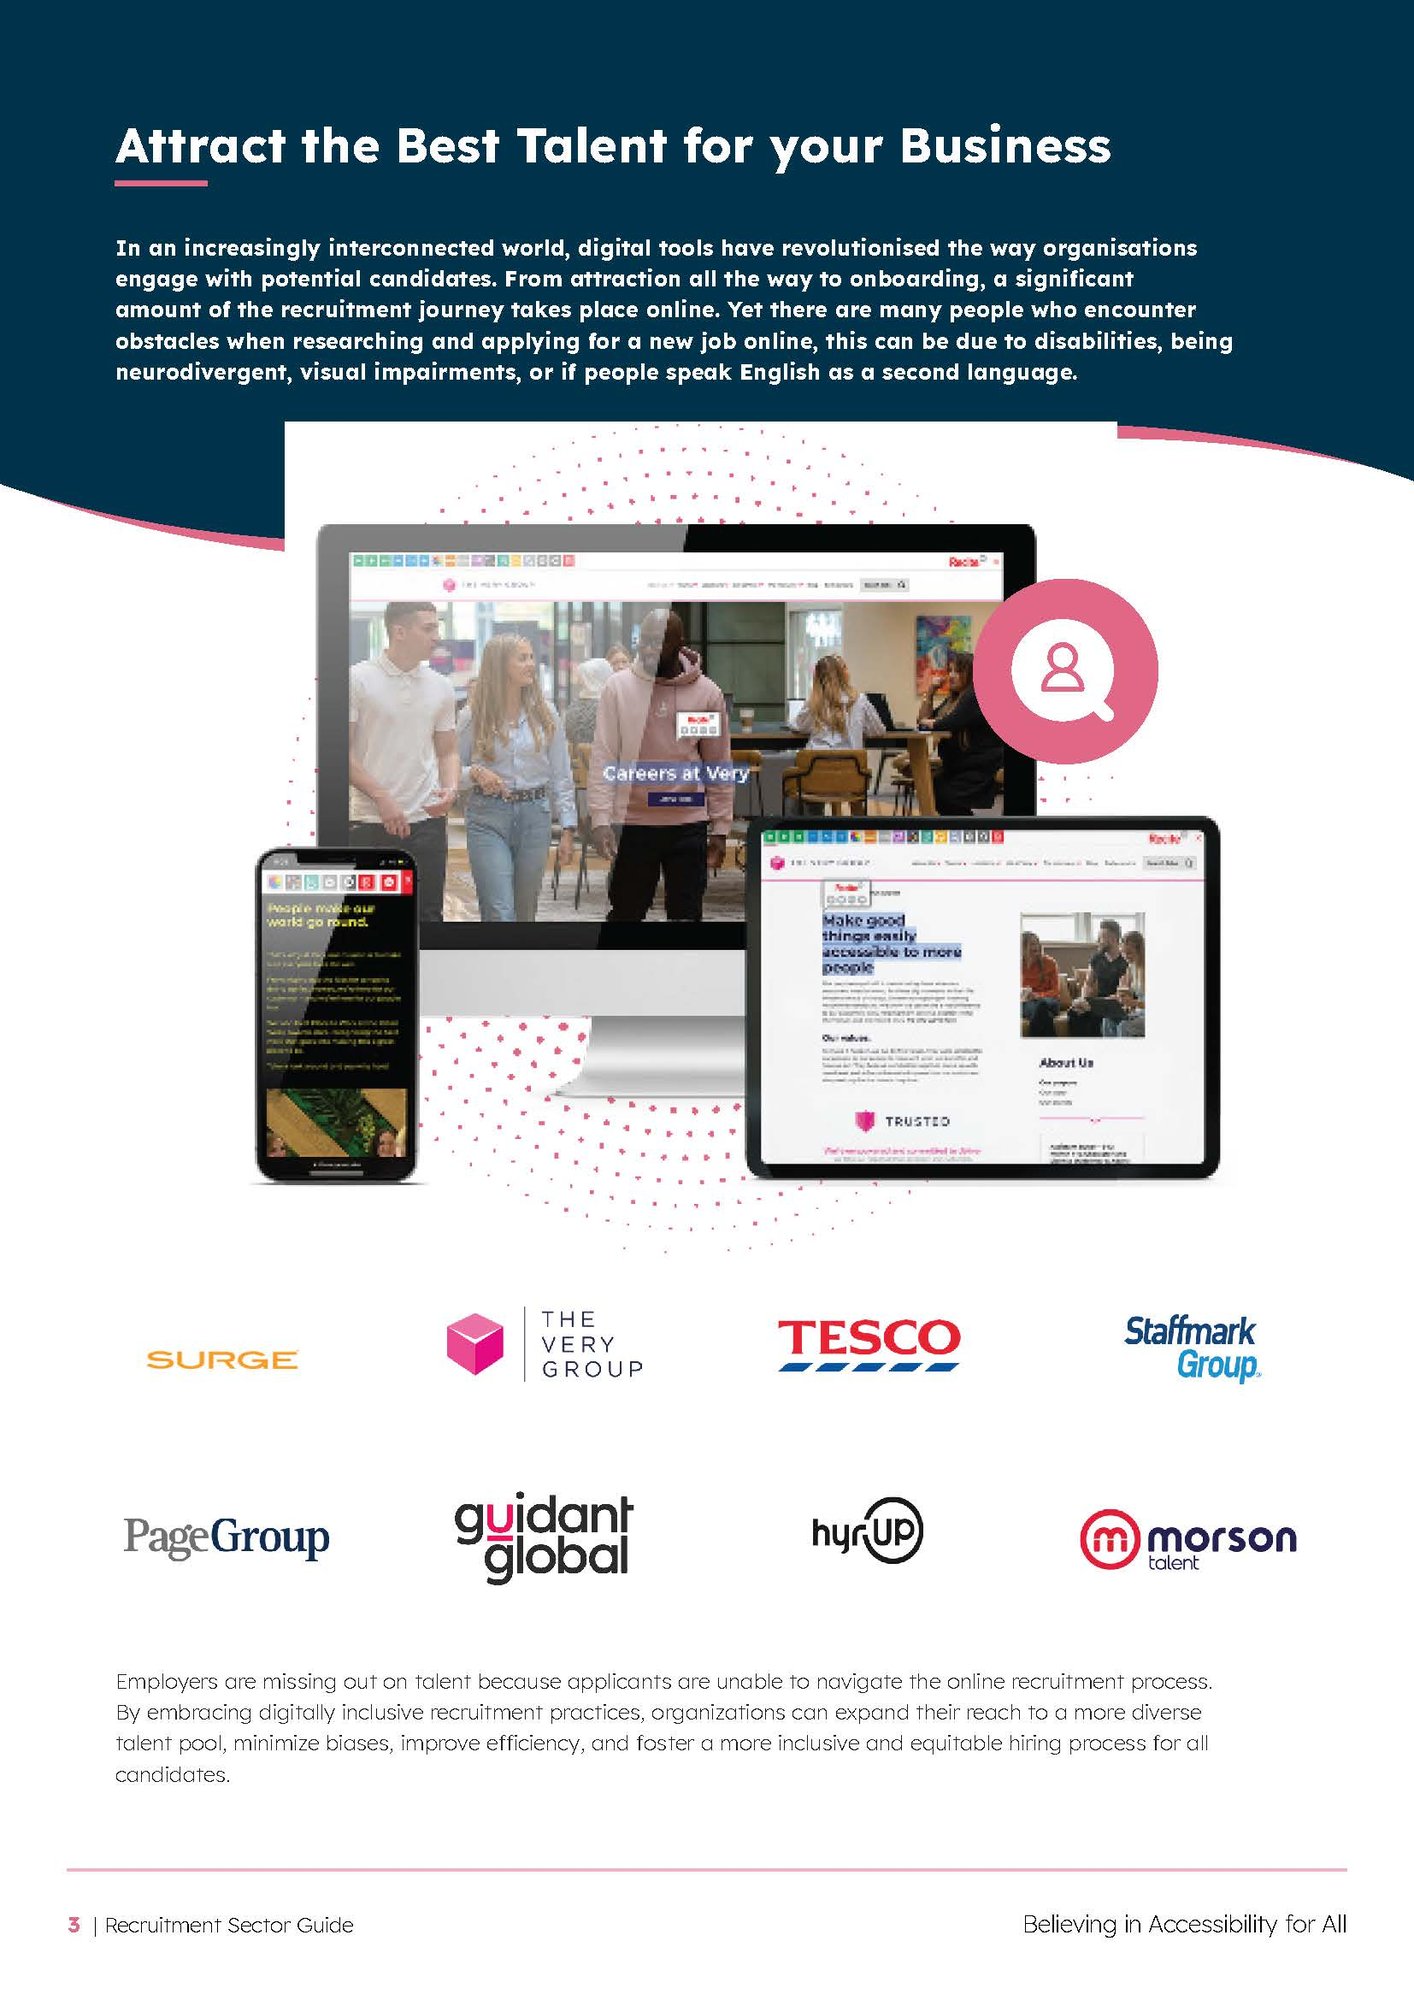 Attract the best talent for your business page from the Recruitment Sector Guide